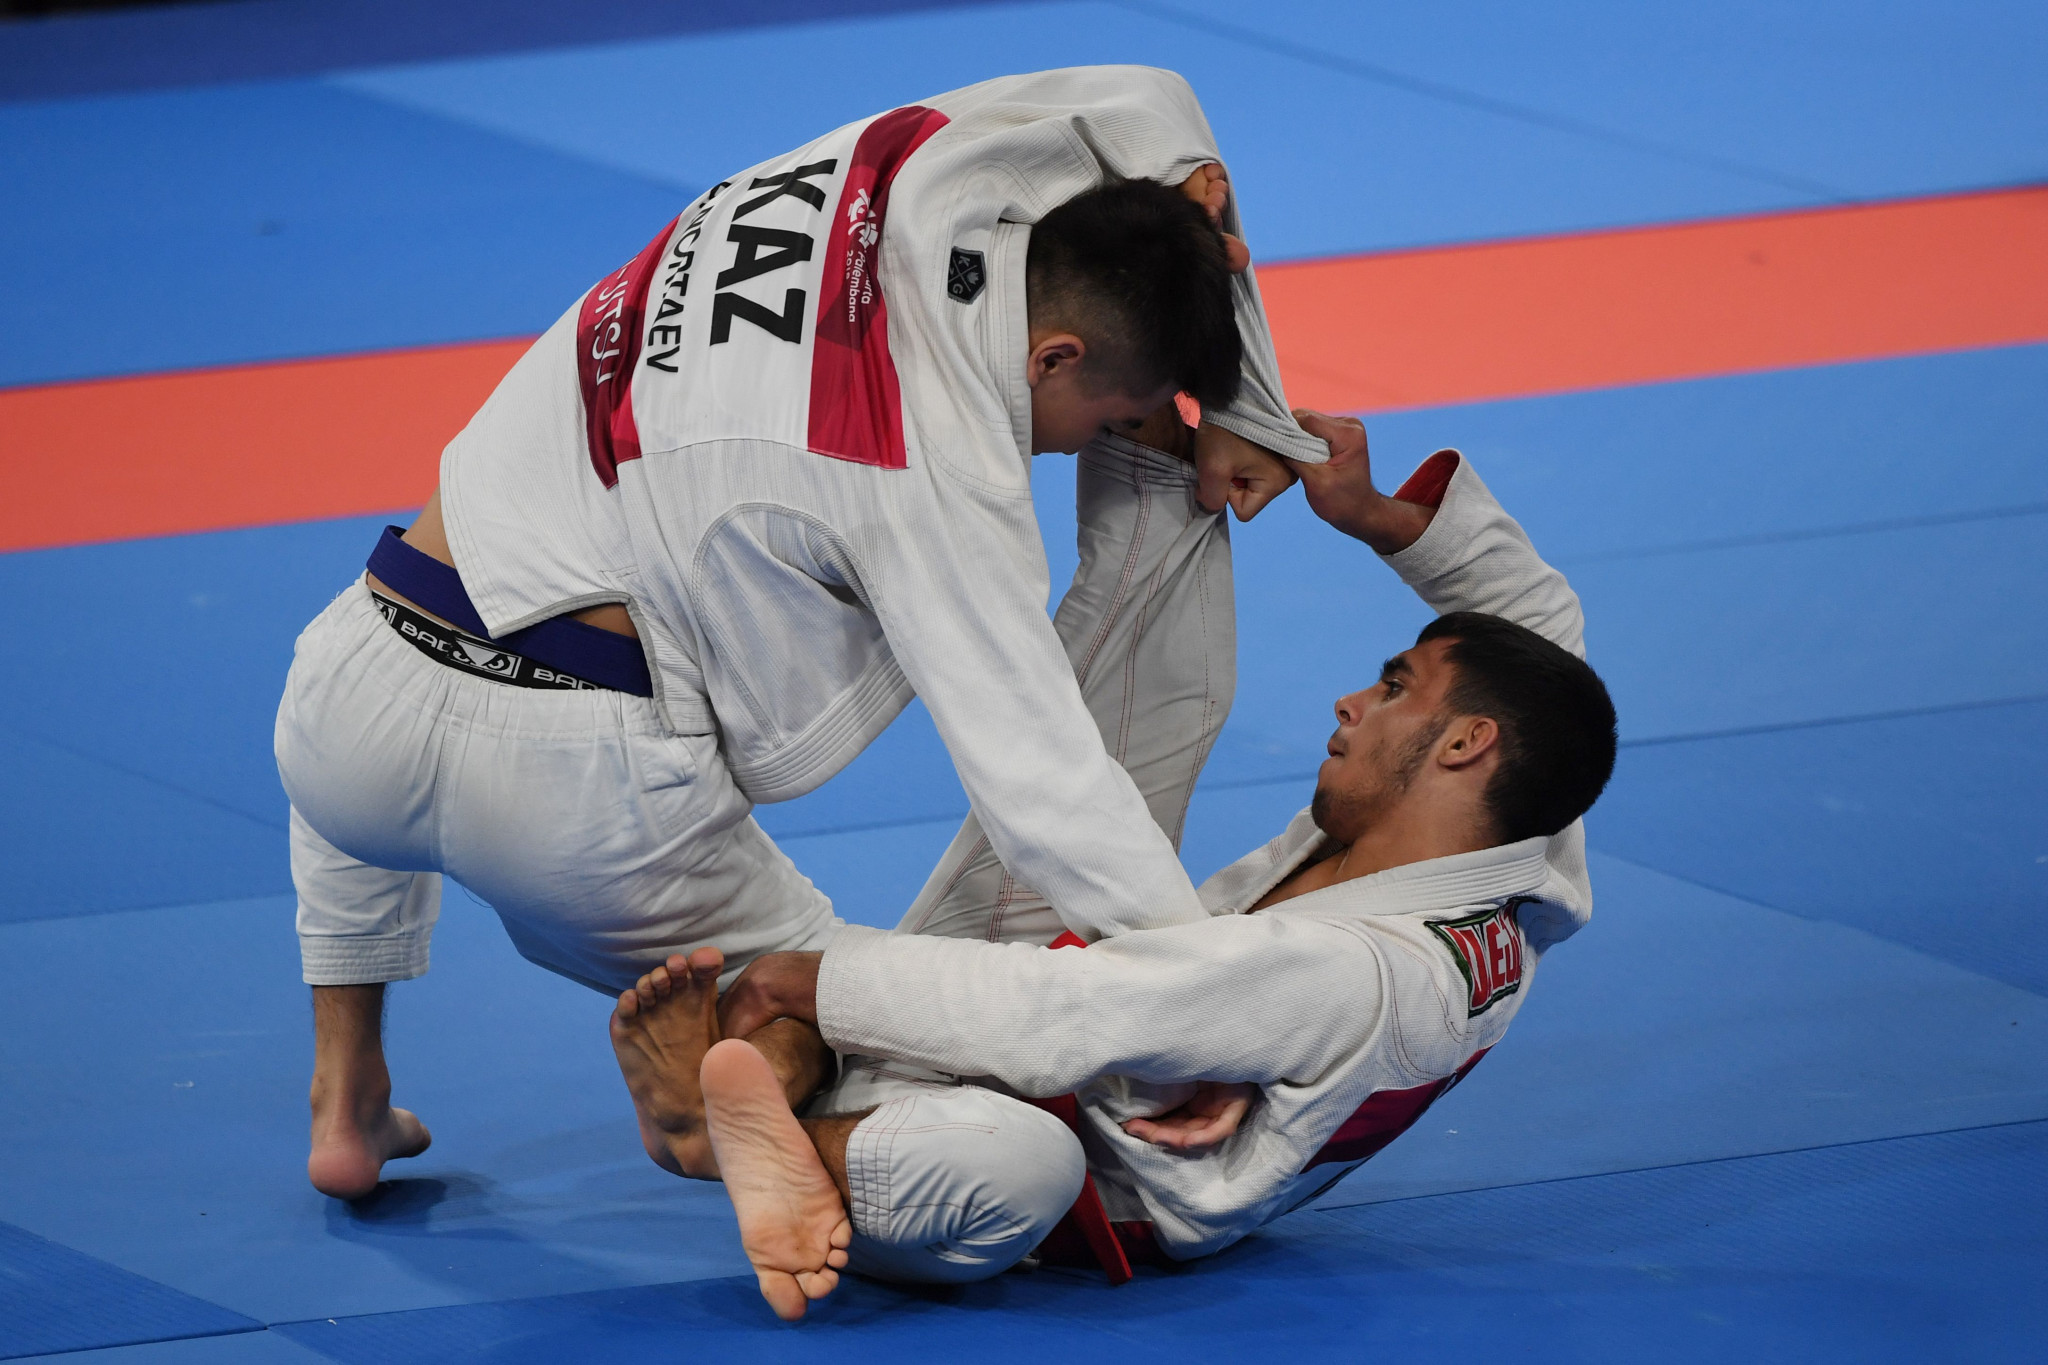 Ju-jitsu has featured at the World Games, Asian Games and Asian Indoor and Martial Arts Games ©Getty Images